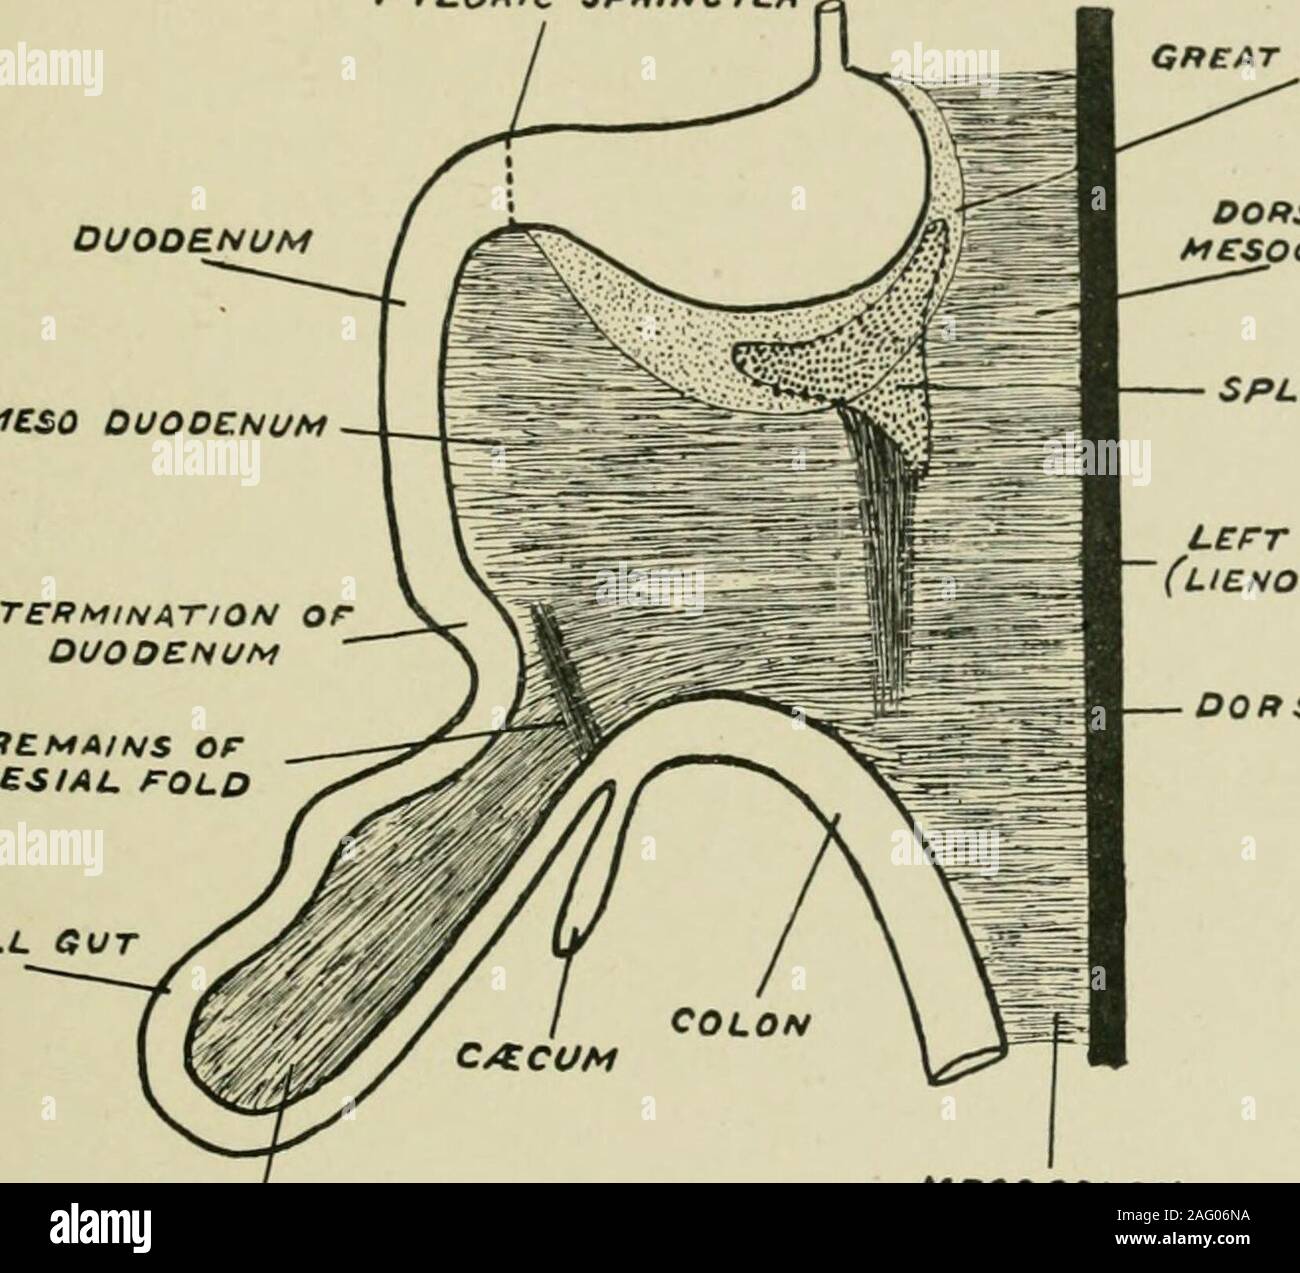 . Journal of anatomy. n interval of about 125 cm.—till the commence-ment of the duodenum is reached. Peritoneal adhesions are noted connectingthis portion of the colon and its mesentery to the duodenum and meso-duodenum. The left or distal colon measures 54 cm., and at first (8-10 cm.)comes into relation with the lesser sac, being included by the great omentum. The Peritoneum and Intestinal Tract in Monotremes and Marsupials 289 This portion forms an arch from right to left, following practically thegreat curve of stomach as far as the extremity of the right process ofspleen. It is then contin Stock Photo